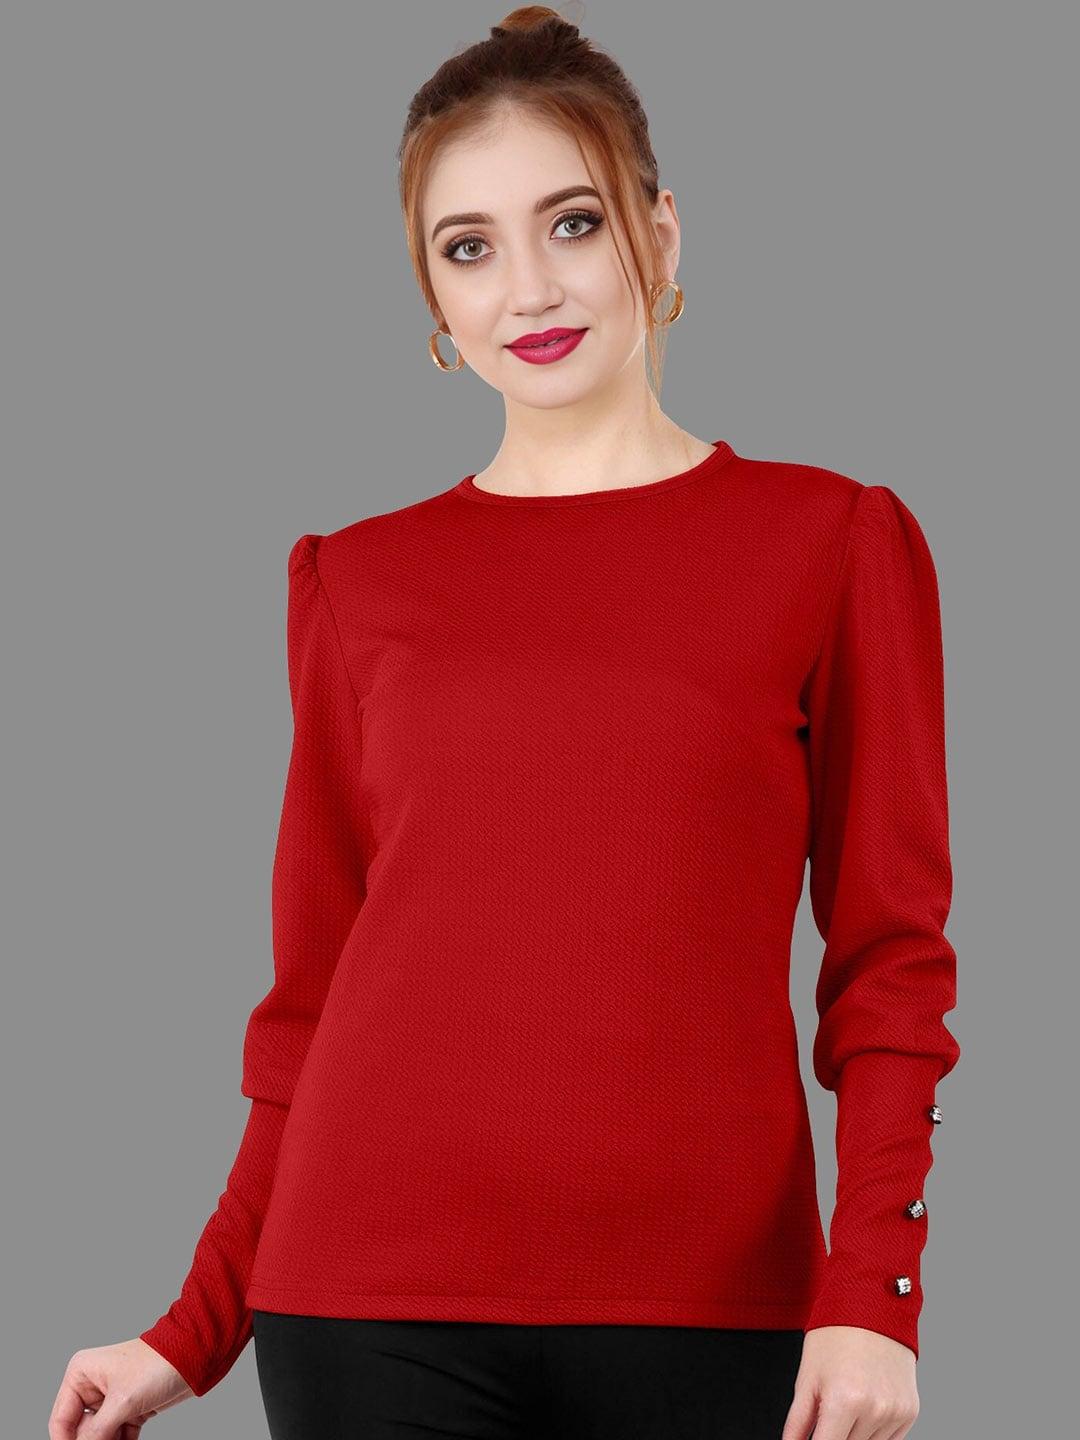 BAESD Red Top